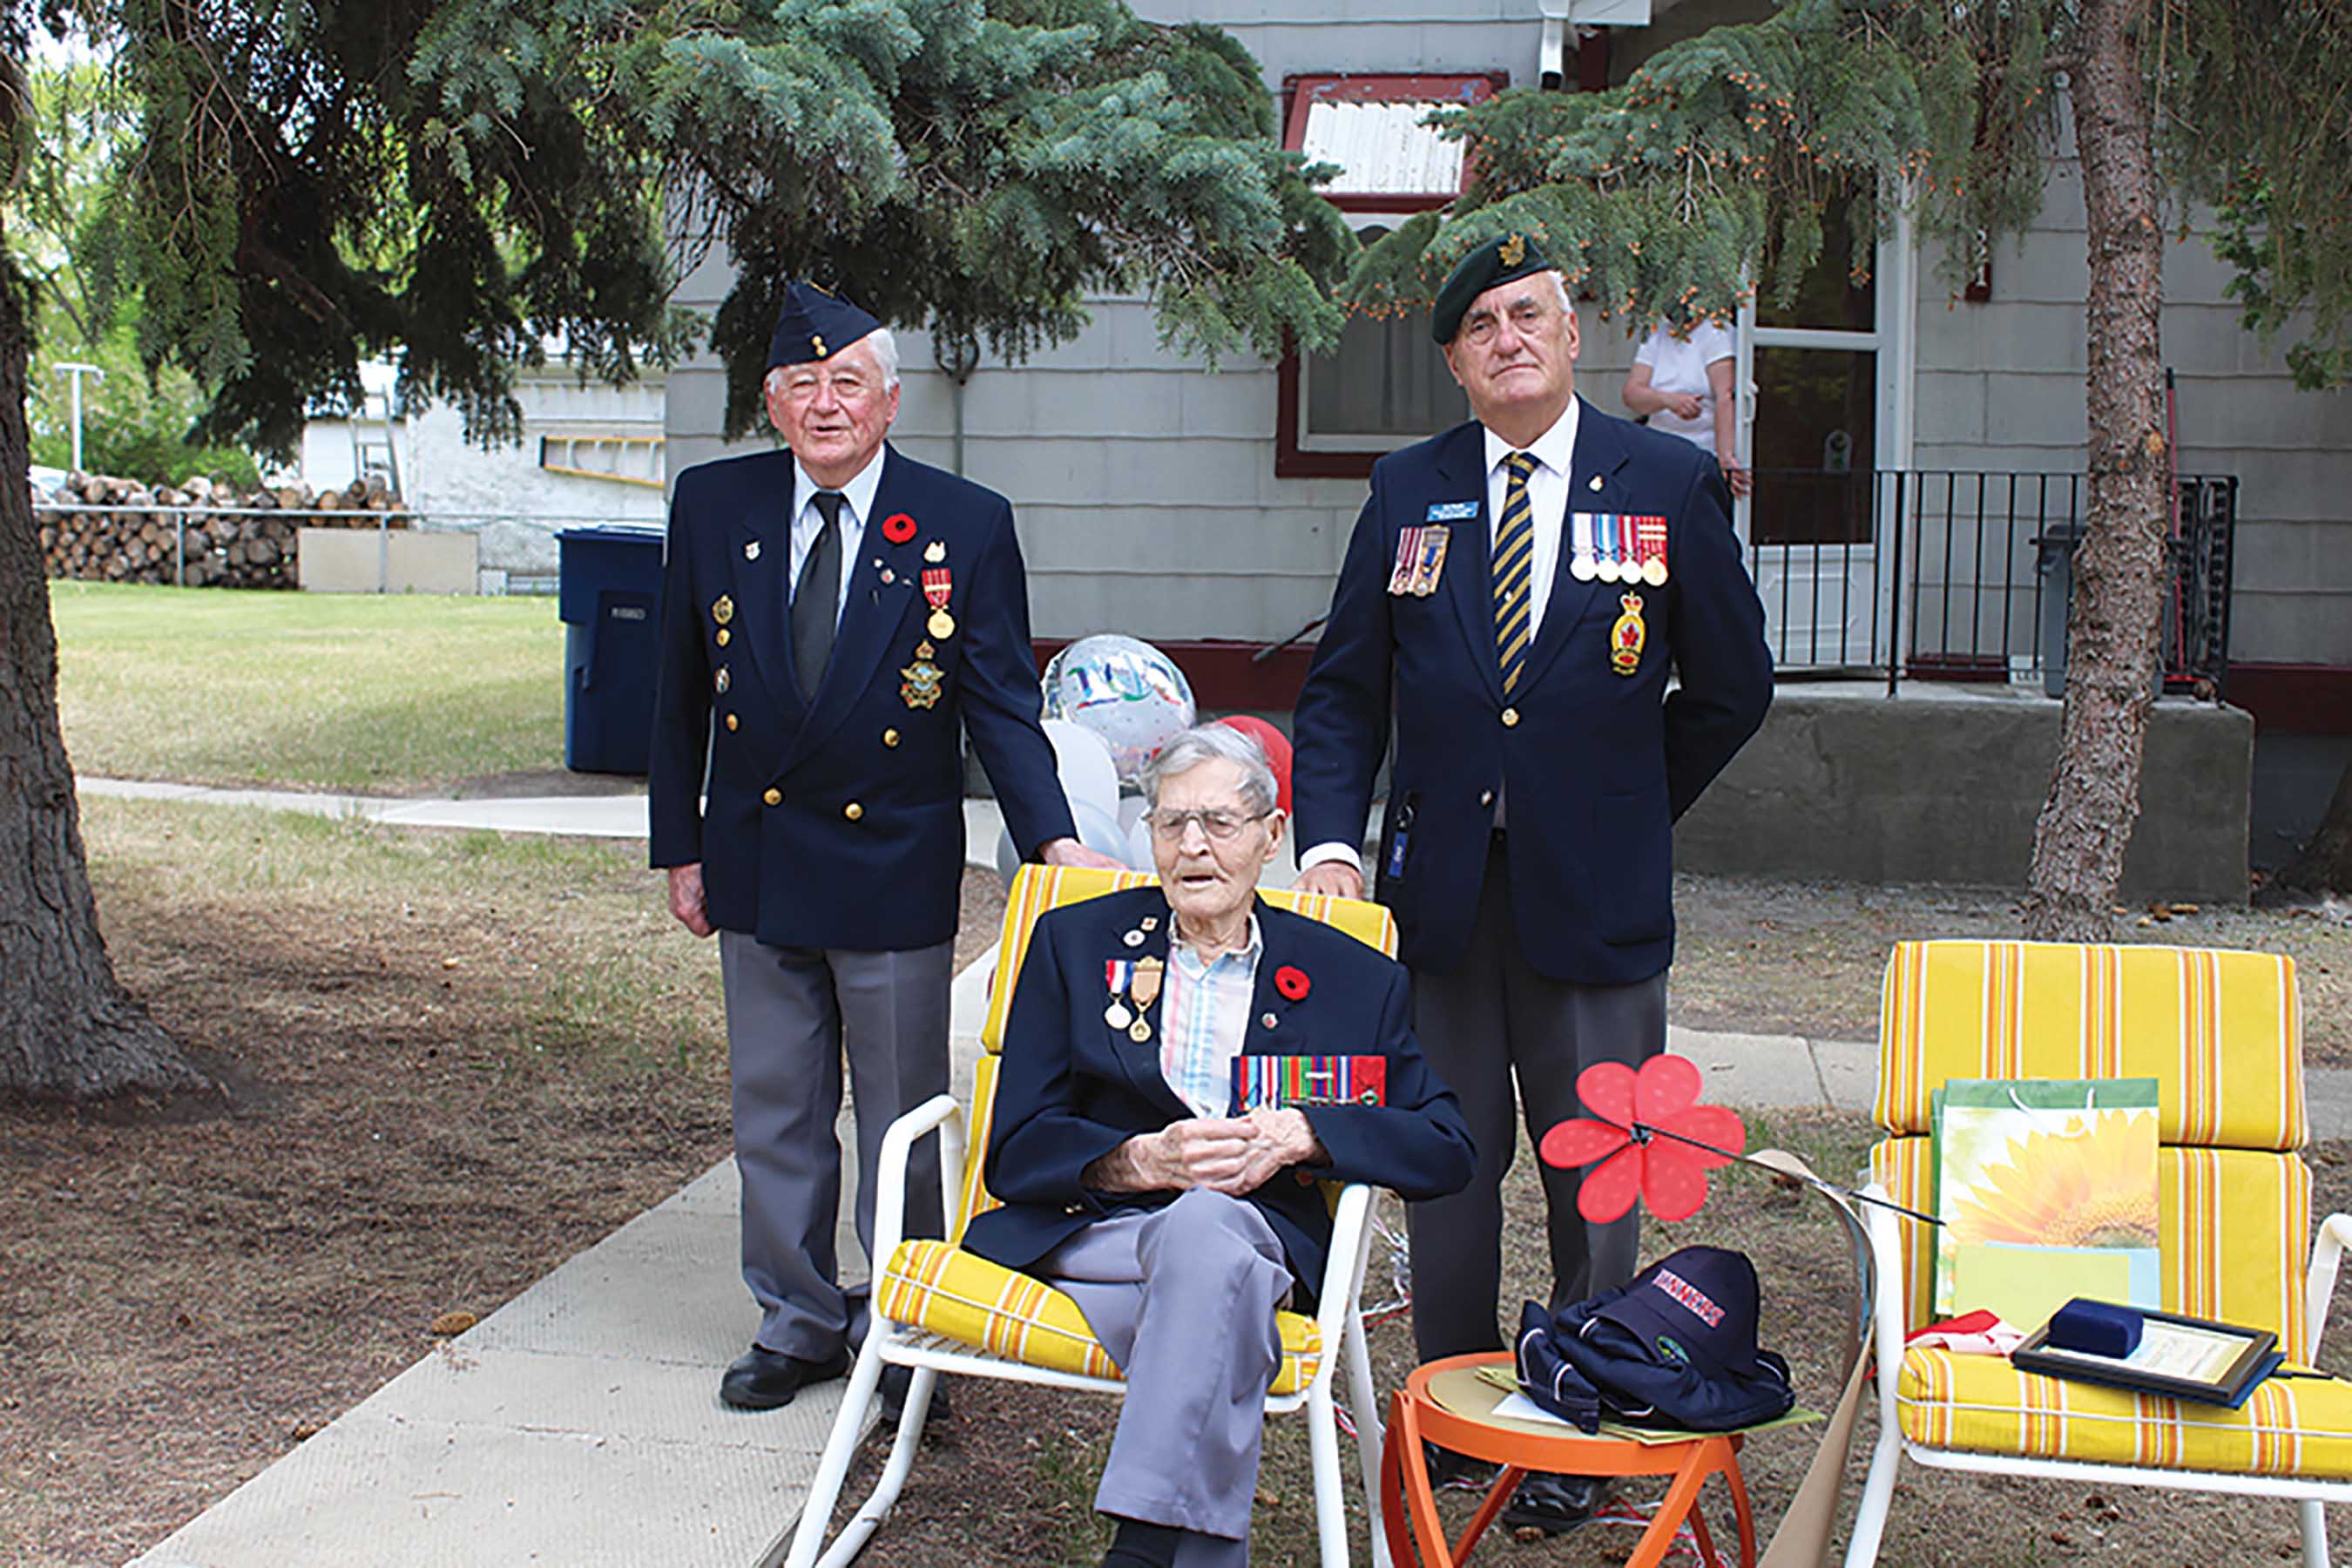 John Fefchak, left, a military veteran and caregiver to Les, center, and Captain Kelvon Smith, a long-time Virden educator. Smith was a major organizer of the  birthday parade for Les, along with Fefchak.<br />
